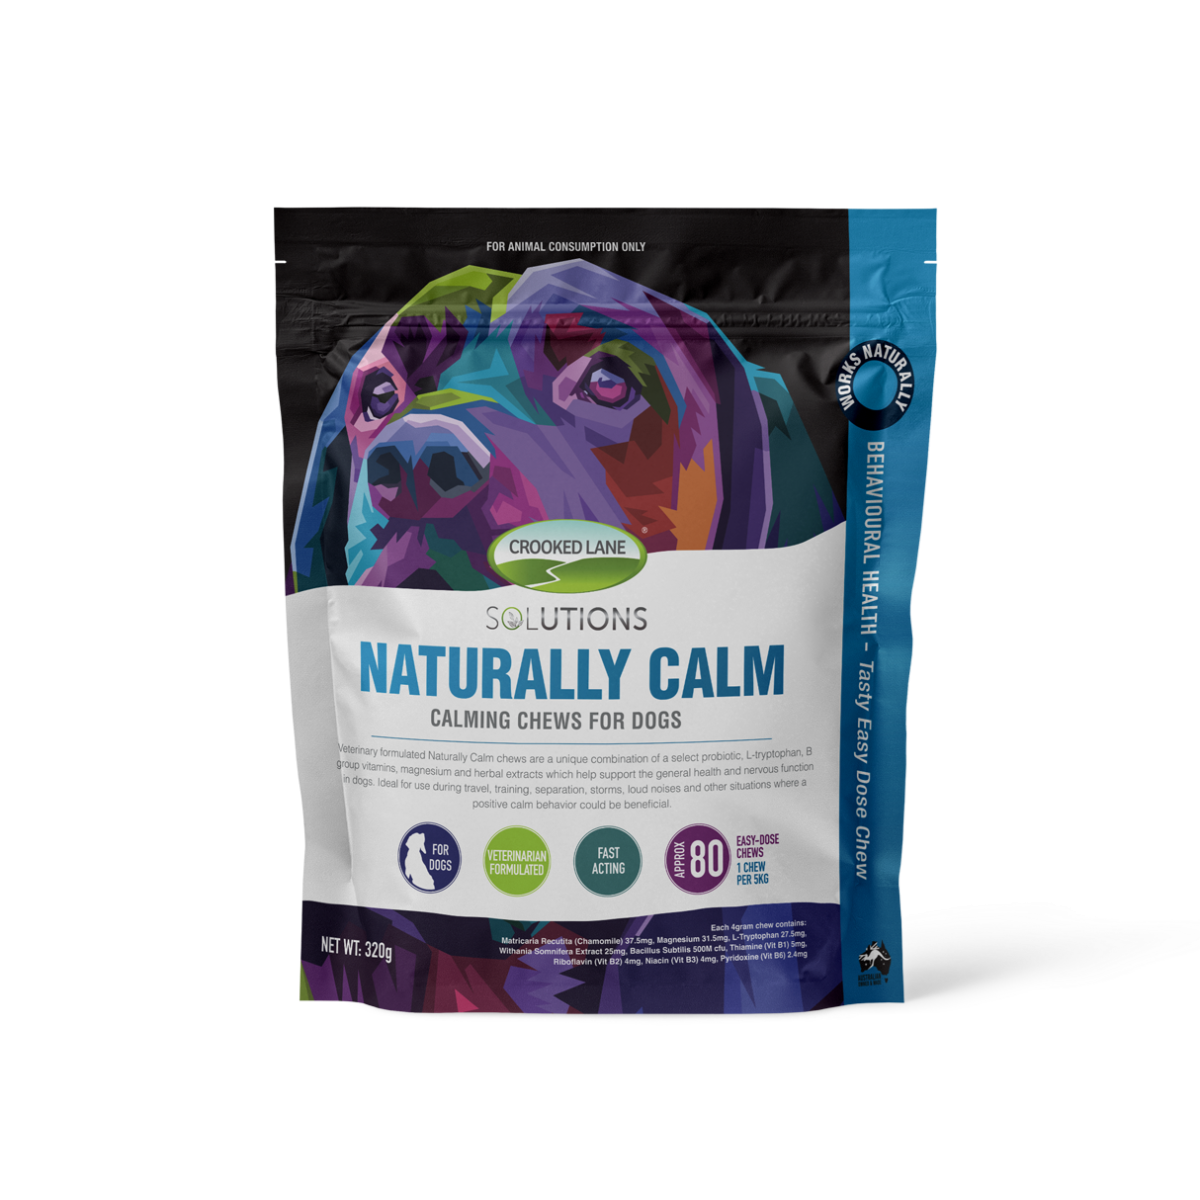 Naturally Calm Chews for Dogs